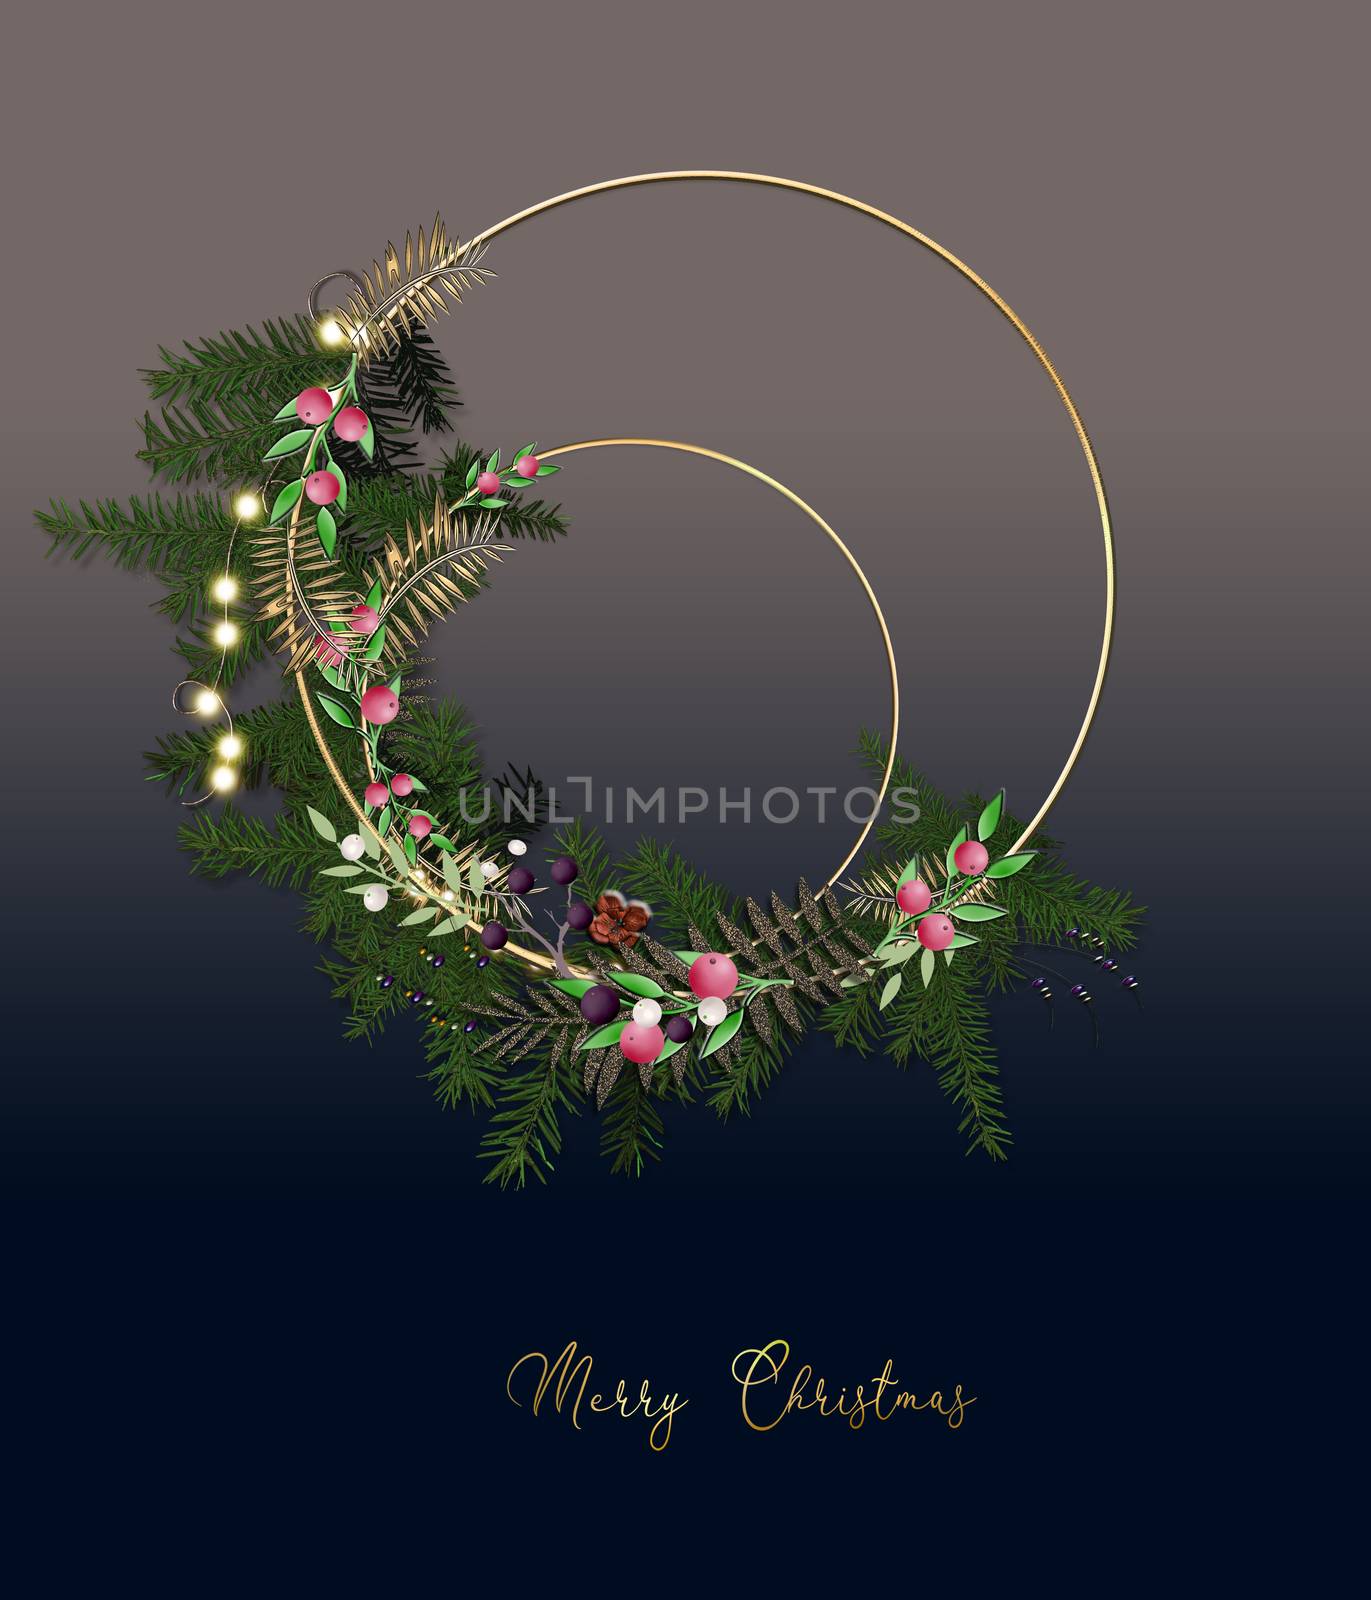 Christmas Wreath. Elegant floral design of Wreath, garland with lights, decorations. Gold text Merry Christmas on blue background. Greetings, 2021 invitation, flyer, brochure, cover. 3D illustration